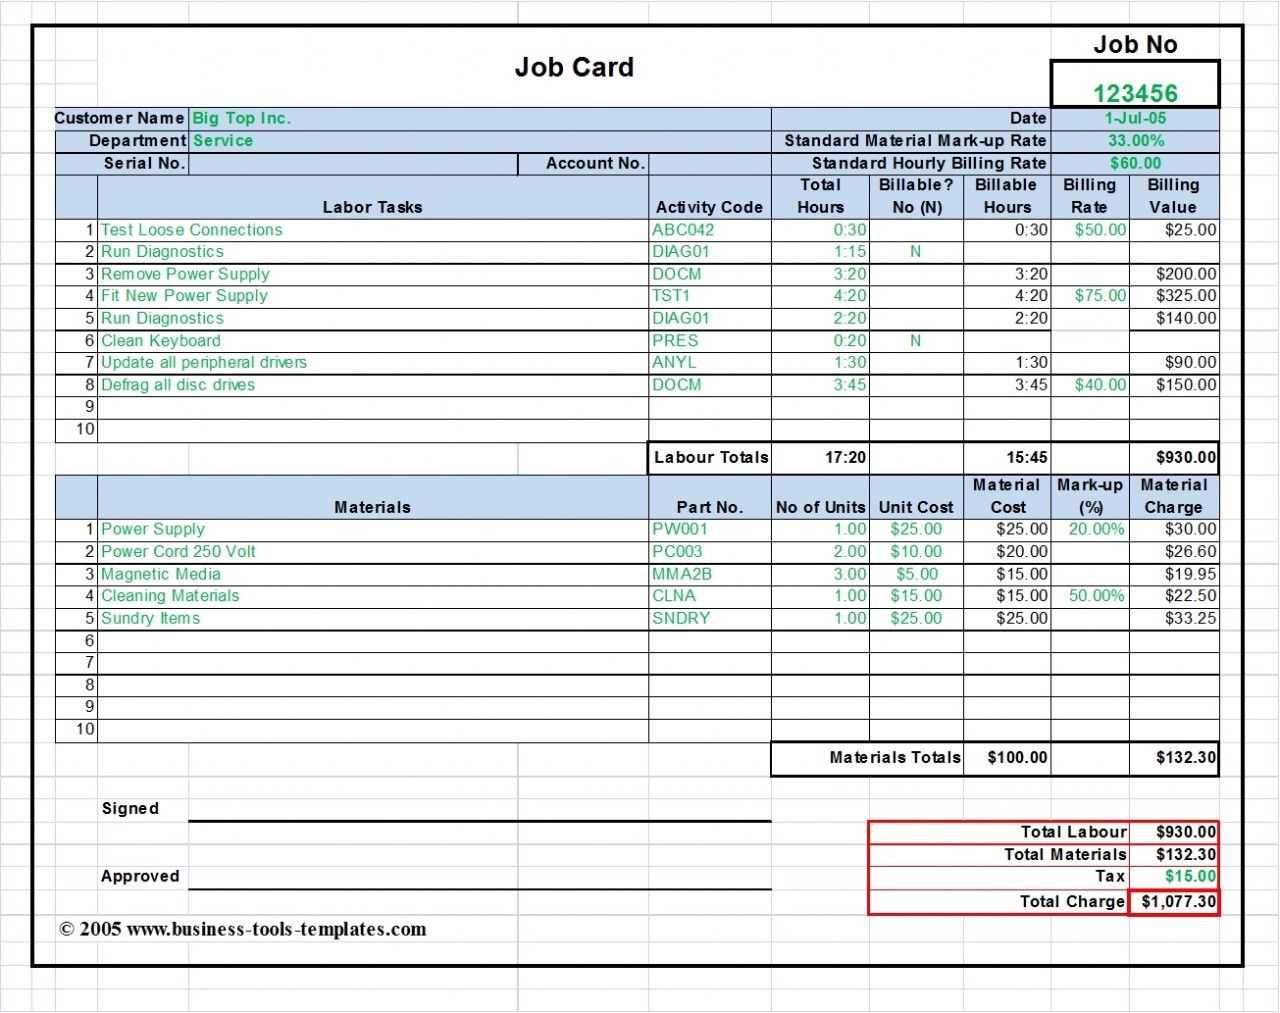 Workshop Job Card Template Excel, Labor & Material Cost For Mechanic Job Card Template